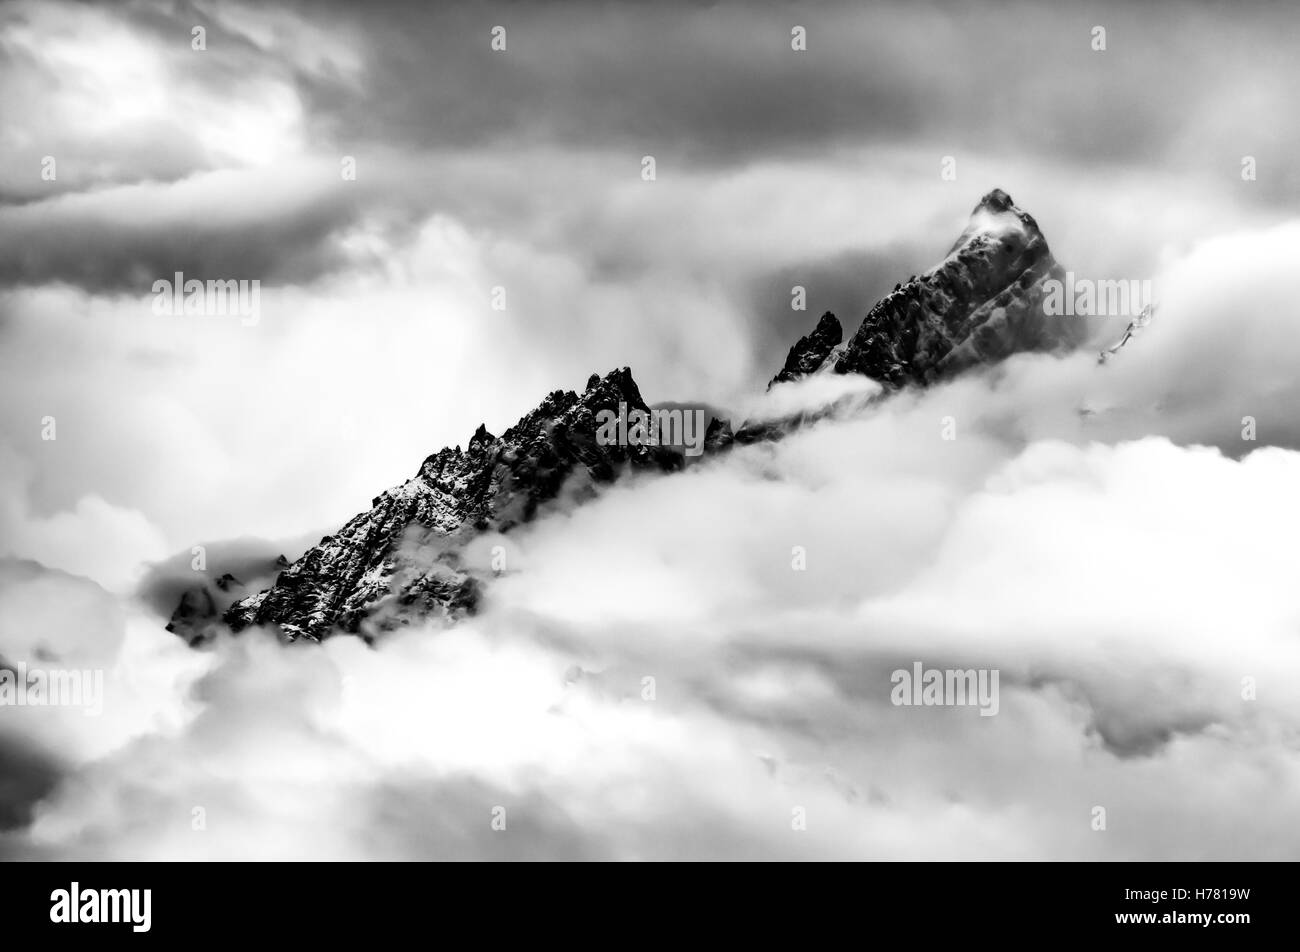 Snow Covered Teton Mountain Crest emerging above thick clouds Stock Photo